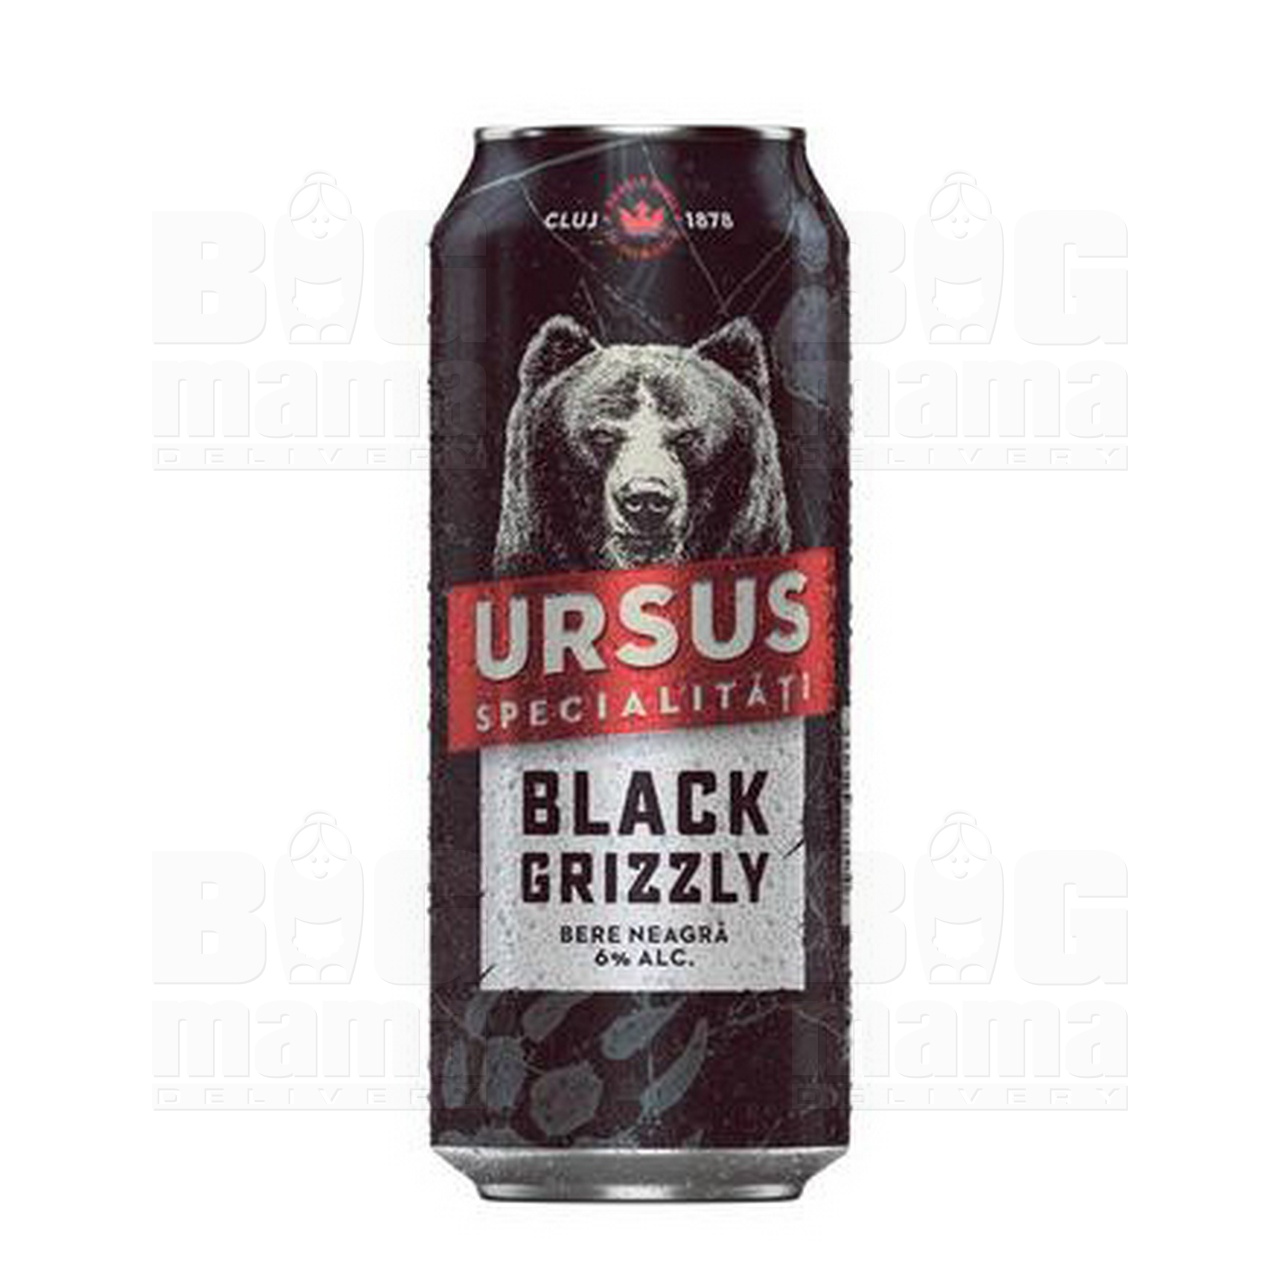 Product #239 image - Ursus Black Grizzly